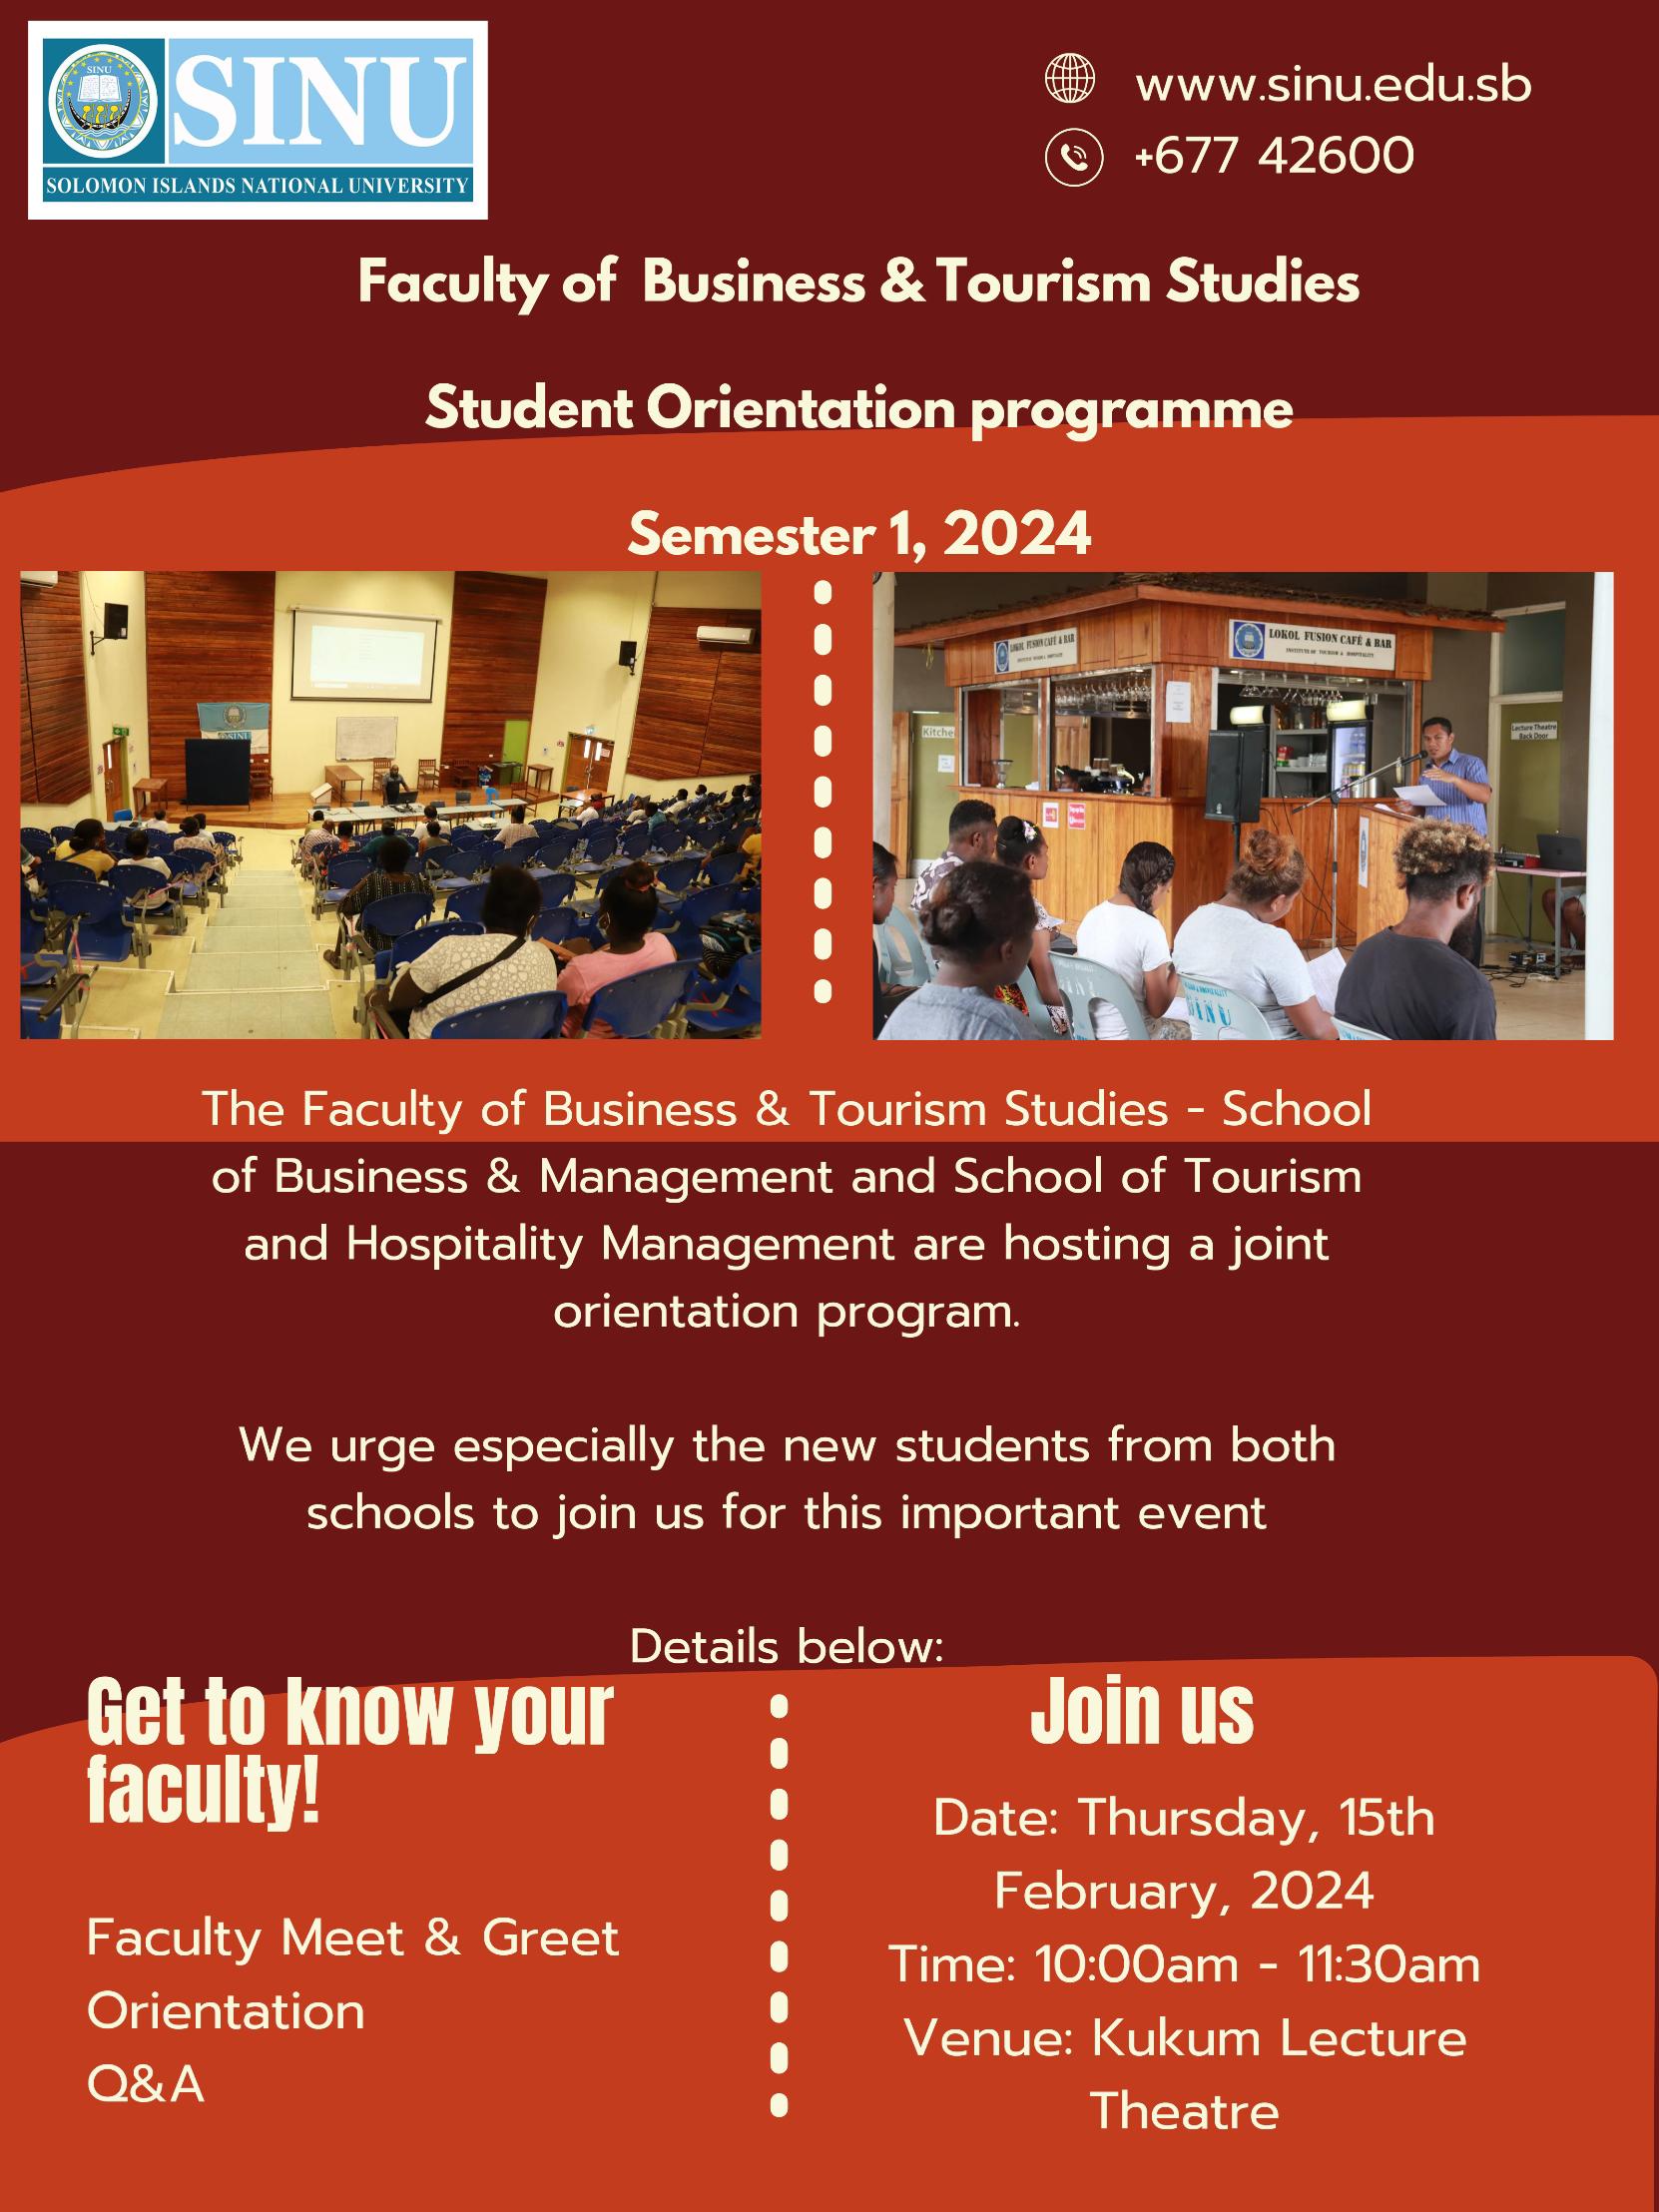 Faculty of Business & Tourism Studies - Student Orientation Programme